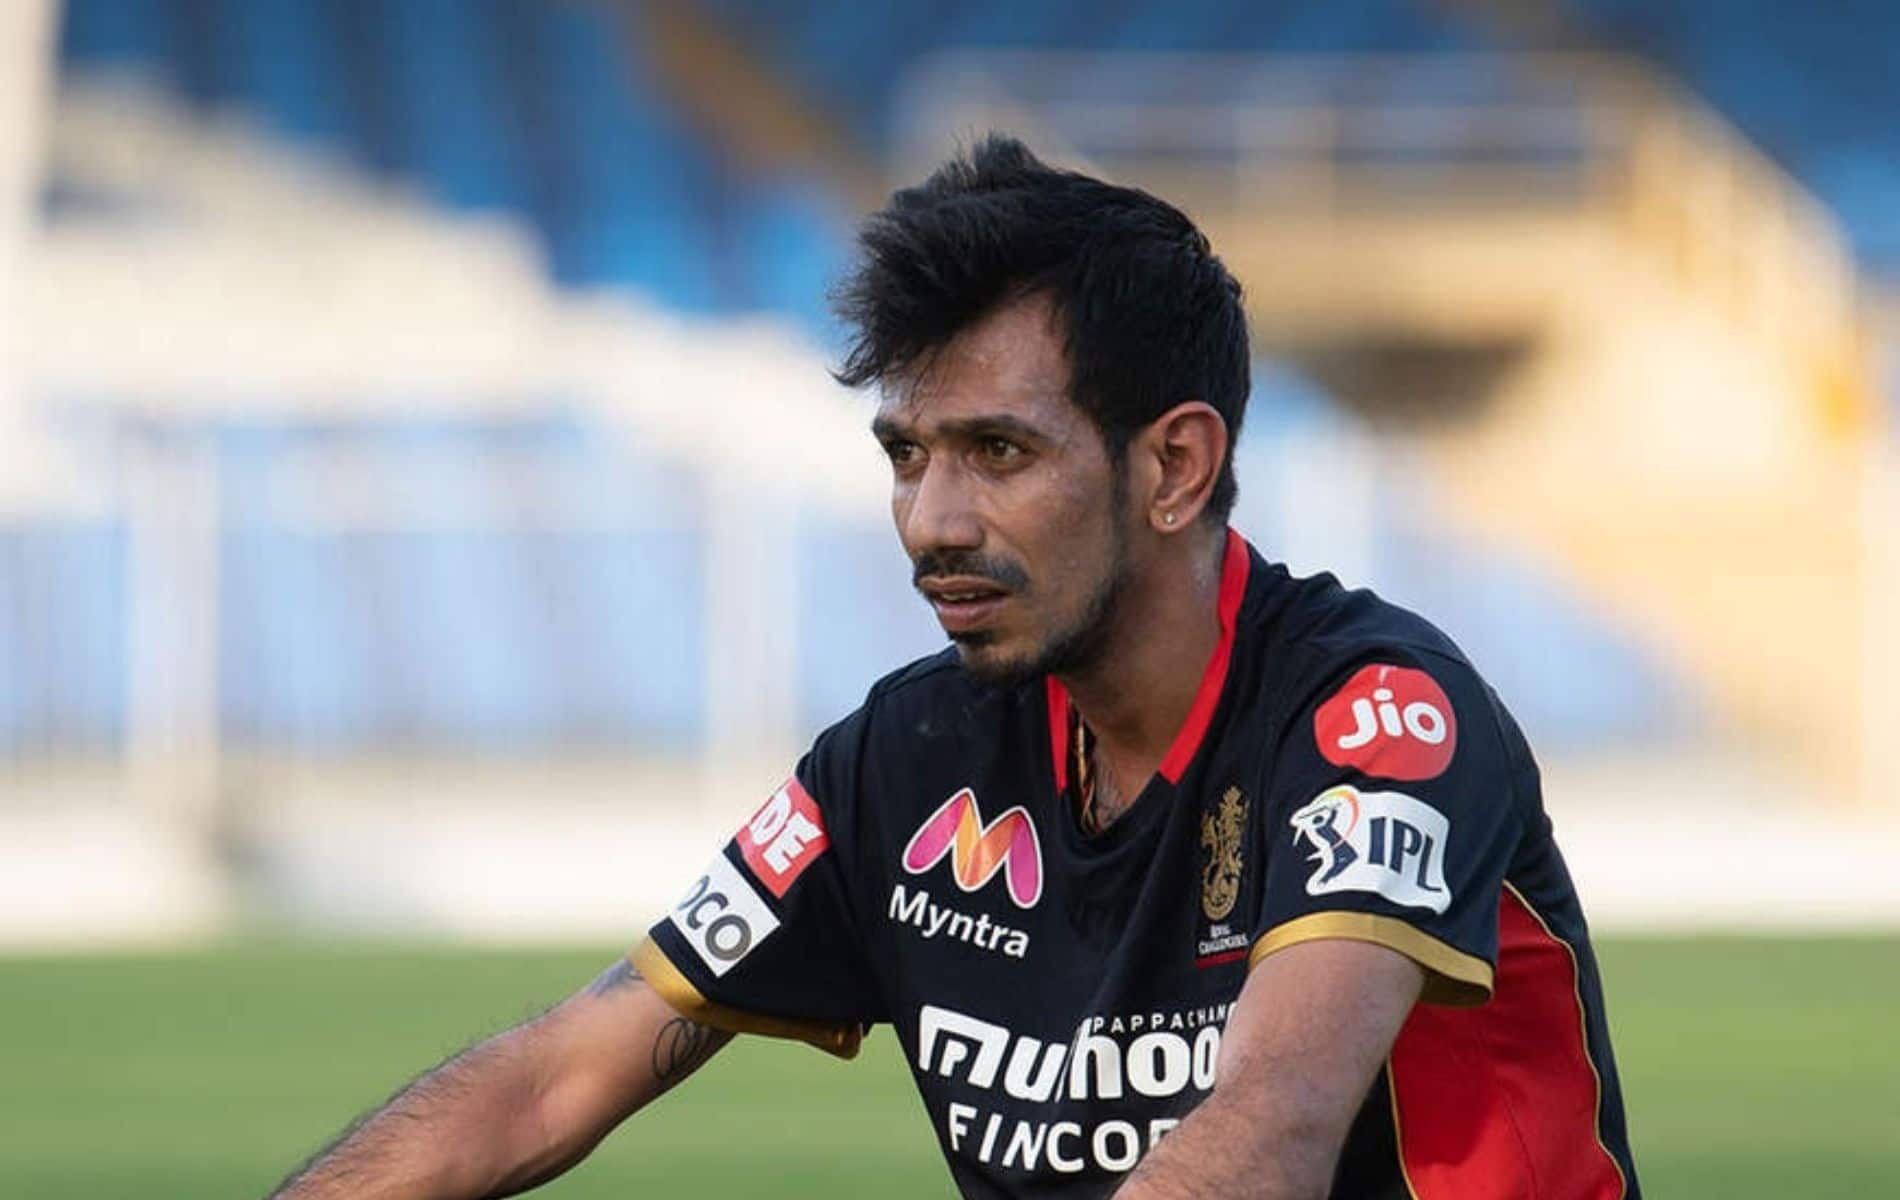 Chahal has left RCB for RR in 2021 mega auctions (X)